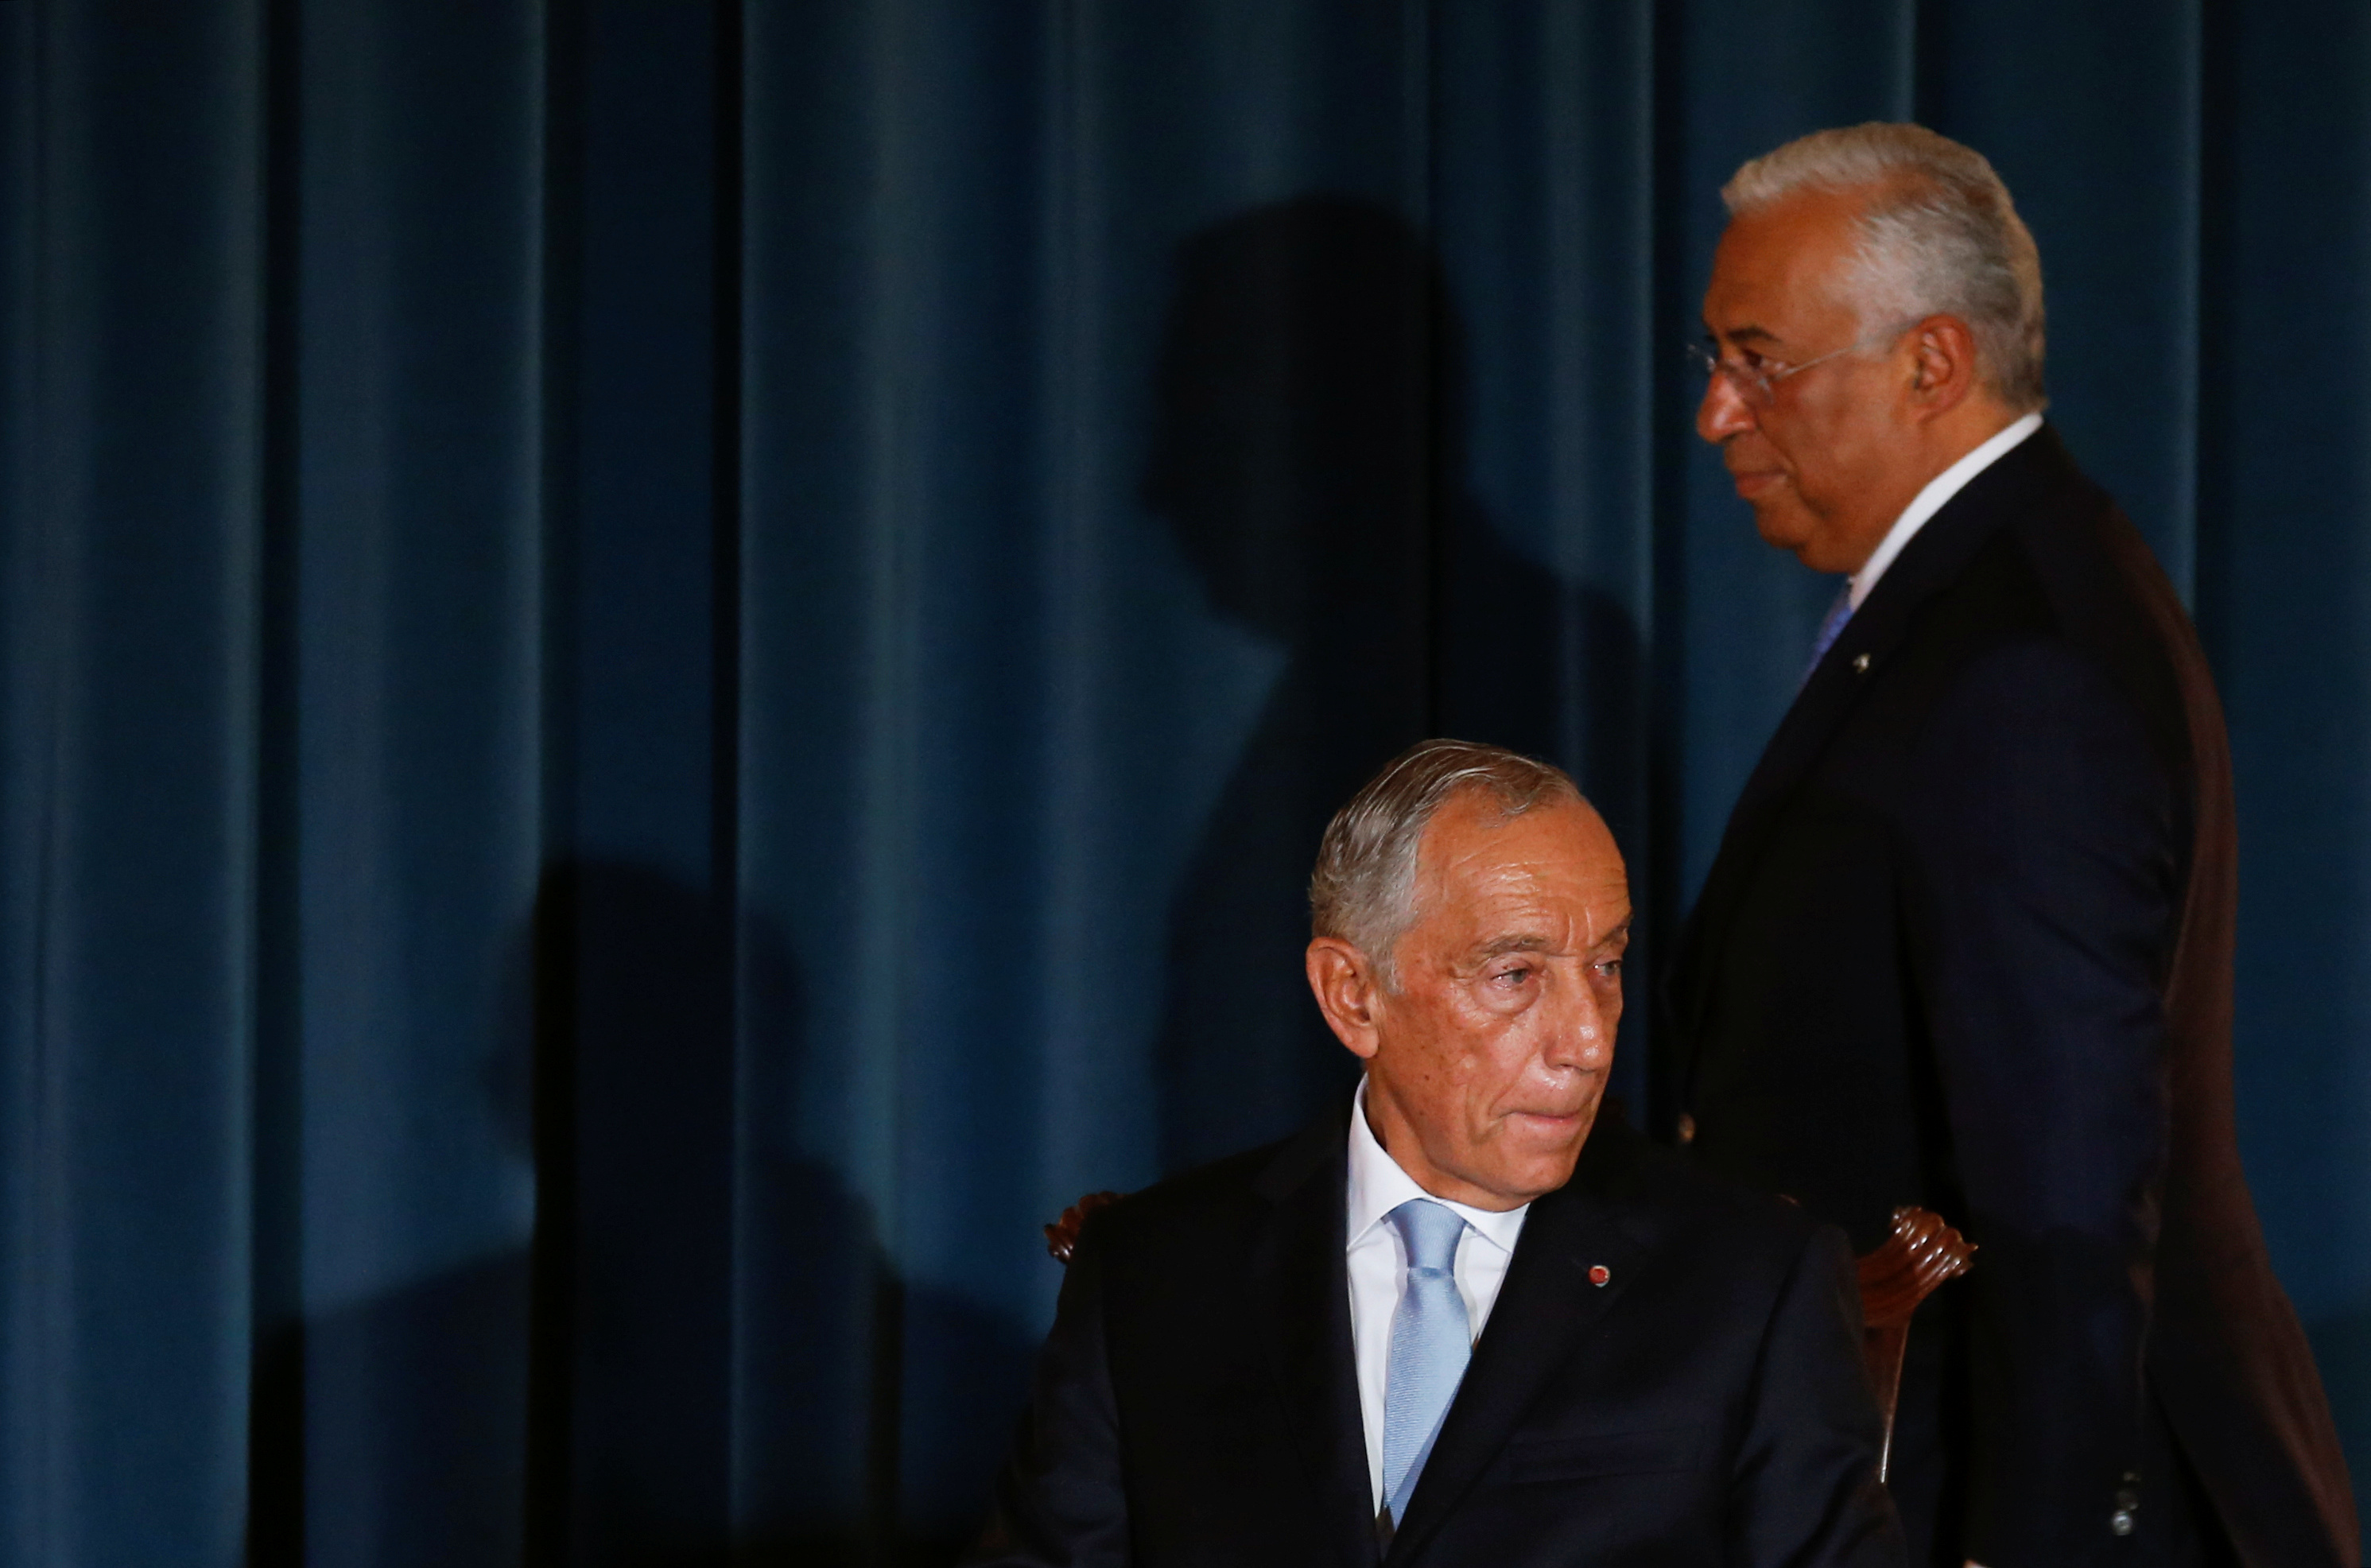 Portugal's Prime Minister Antonio Costa and President Marcelo Rebelo de Sousa attend the swearing-in ceremony of new ministers at Ajuda Palace in Lisbon, Portugal October 26, 2019. REUTERS/Rafael Marchante/Files